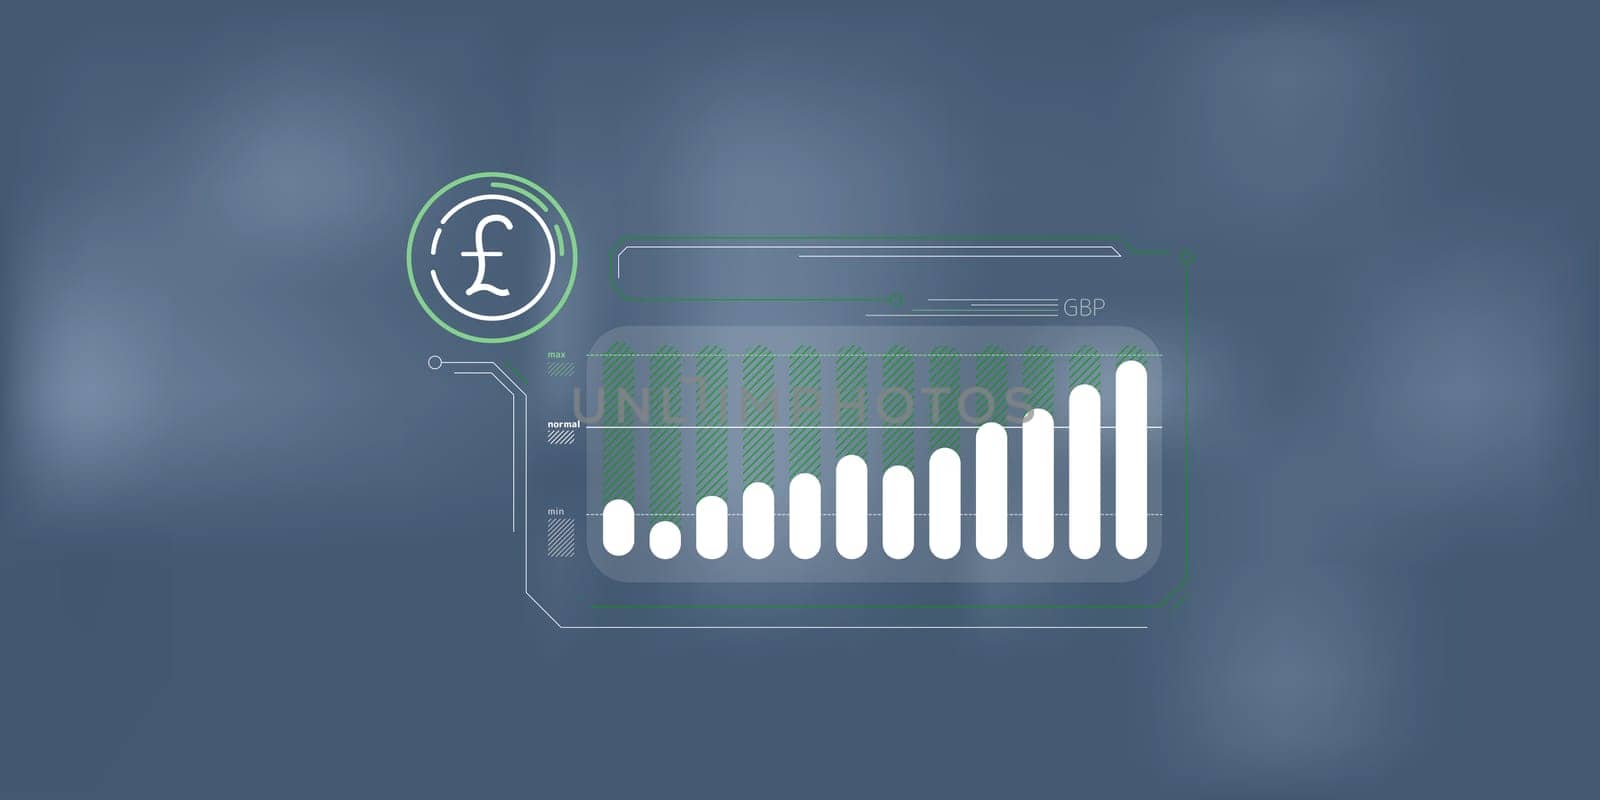 Abstract infographic of rising pound sterling exchange rate. by ConceptCafe